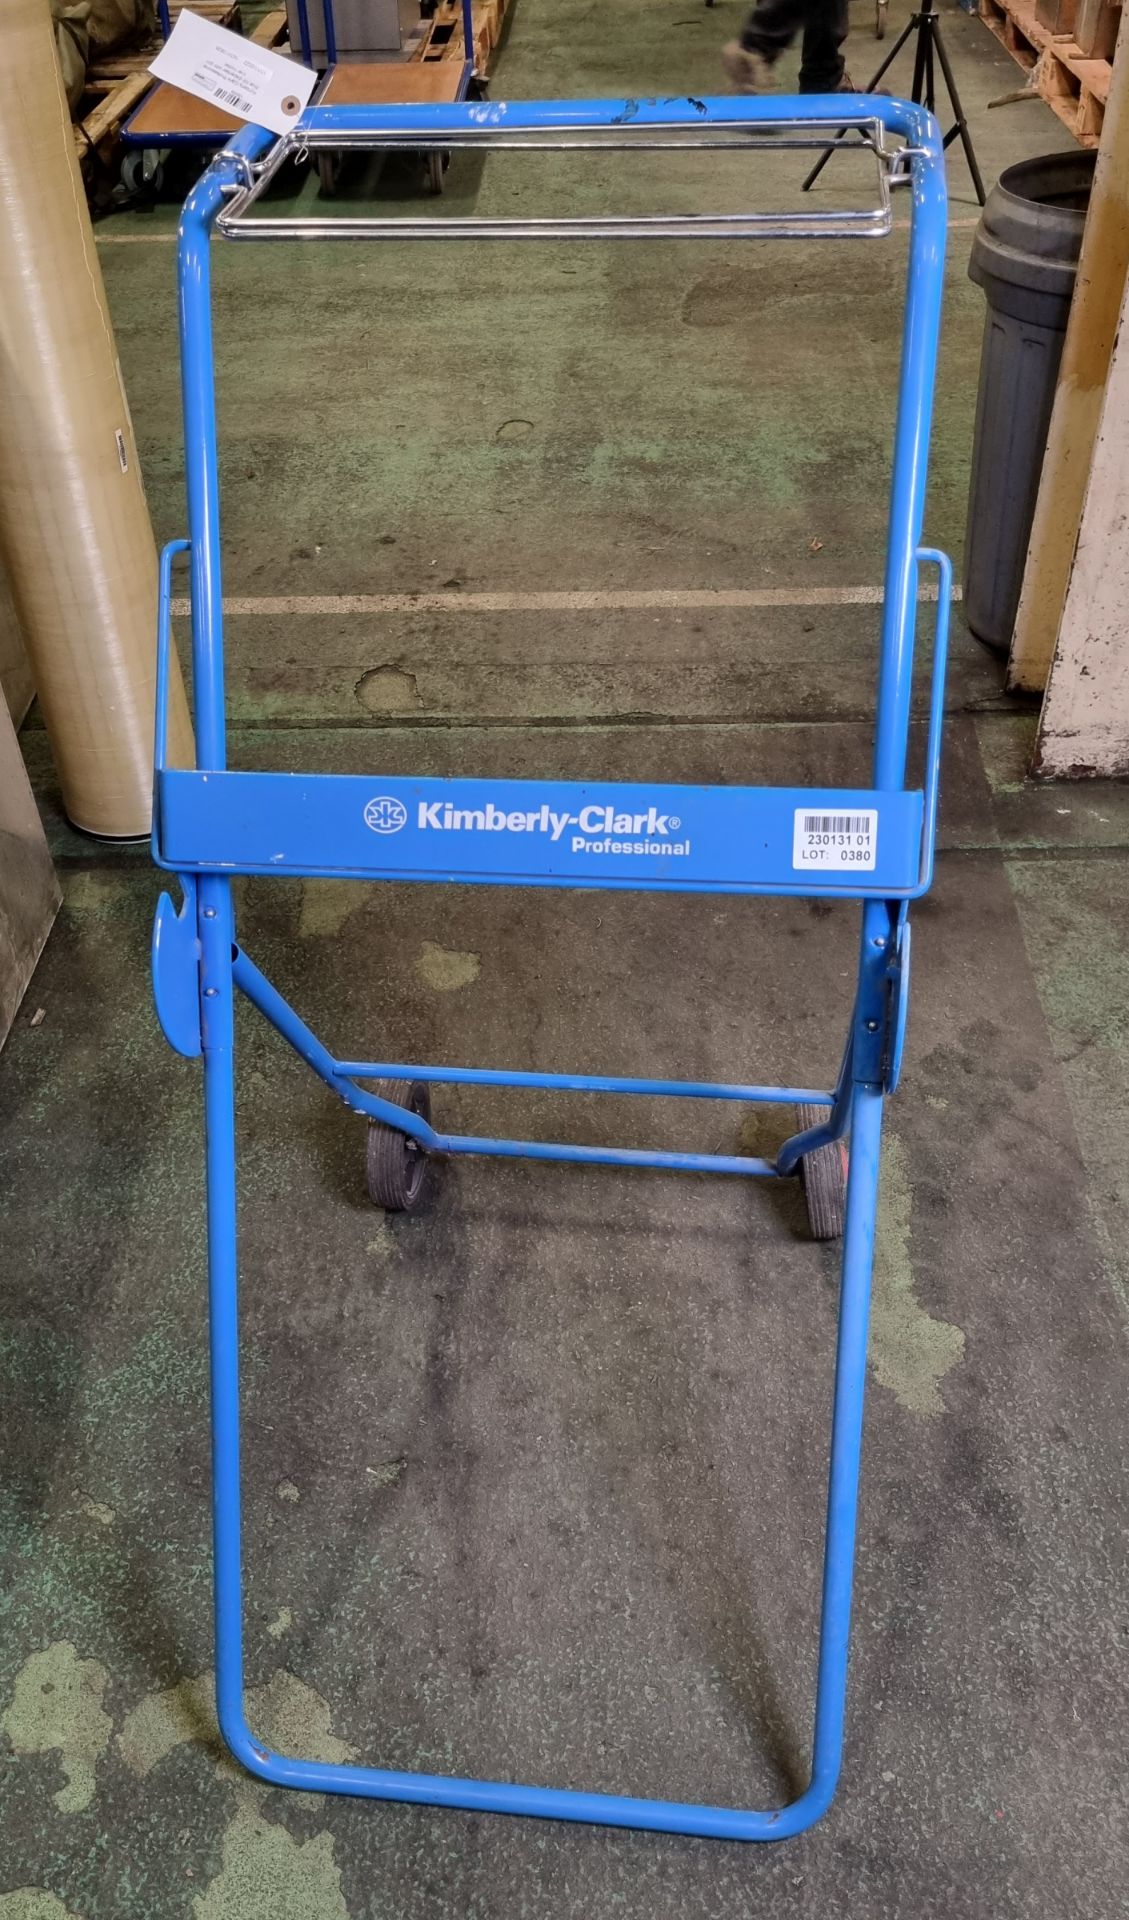 Kimberly Clark Professional blue roll dispenser trolley with bin liner holder